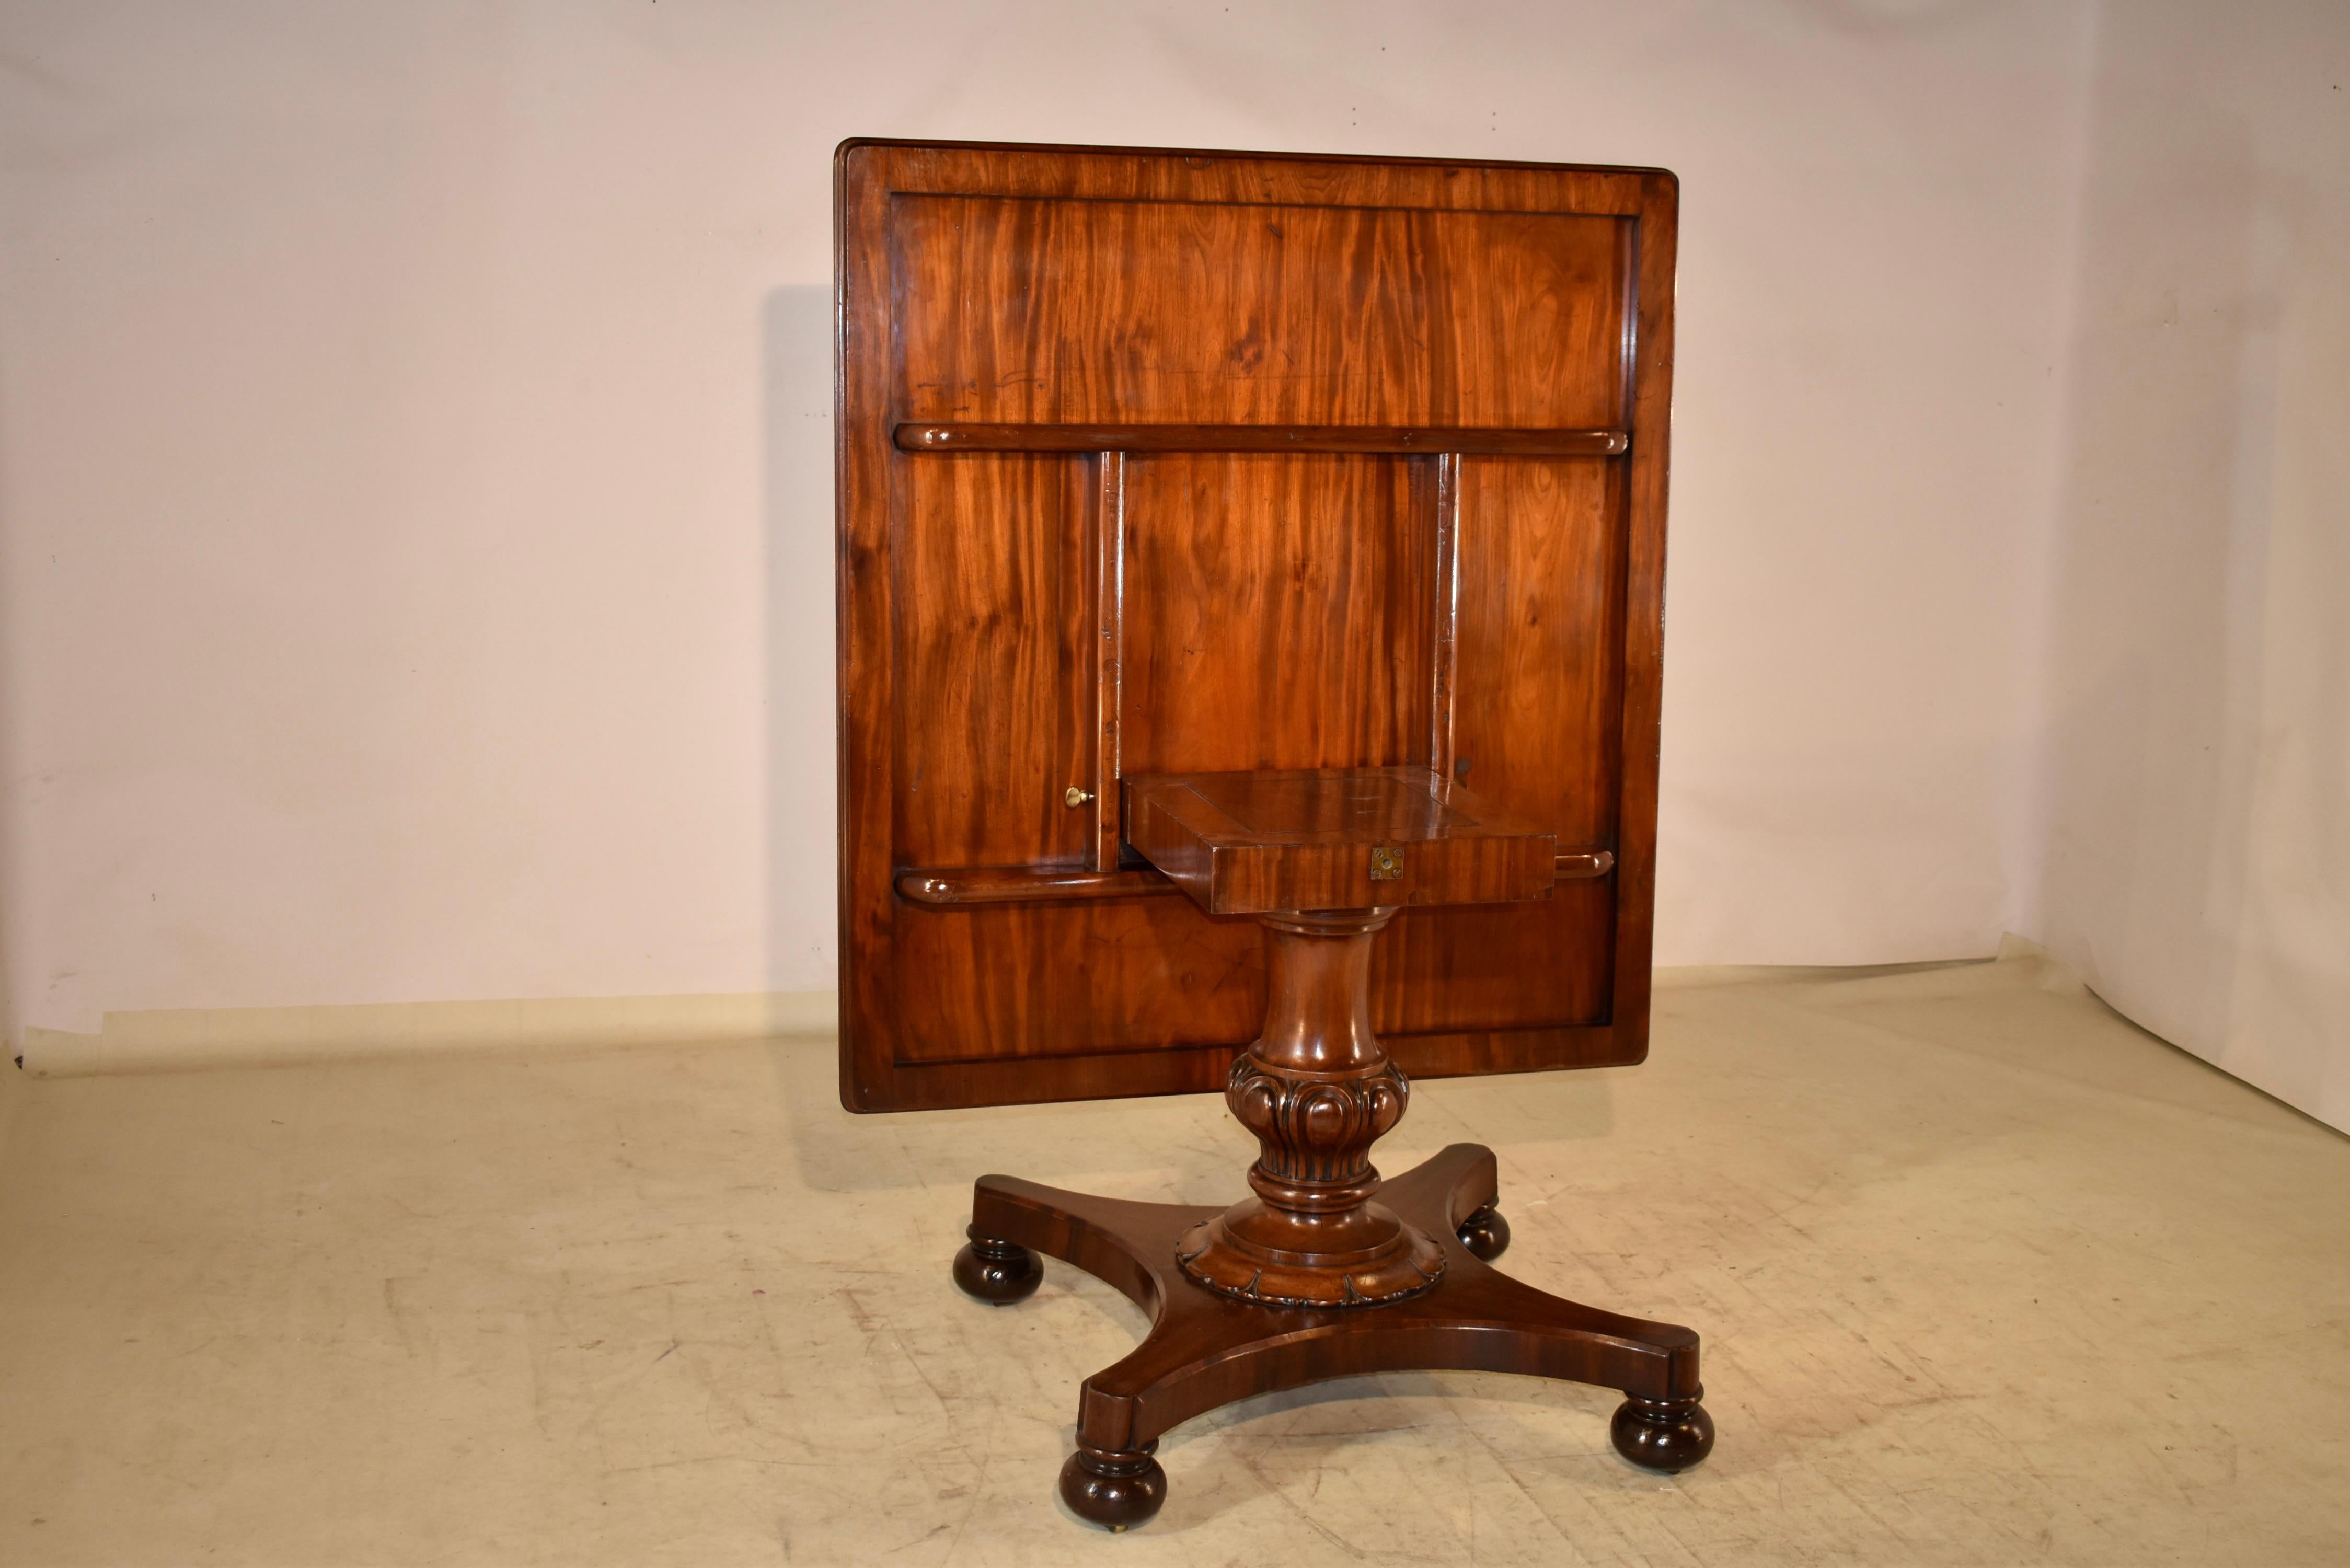 19th century Mahogany tilt-top table from England. The top is made from the most wonderful and richly grained mahogany you have ever seen. The top has a beveled edge and it sits on a hand turned pedestal base with bulbous turnings and hand carved